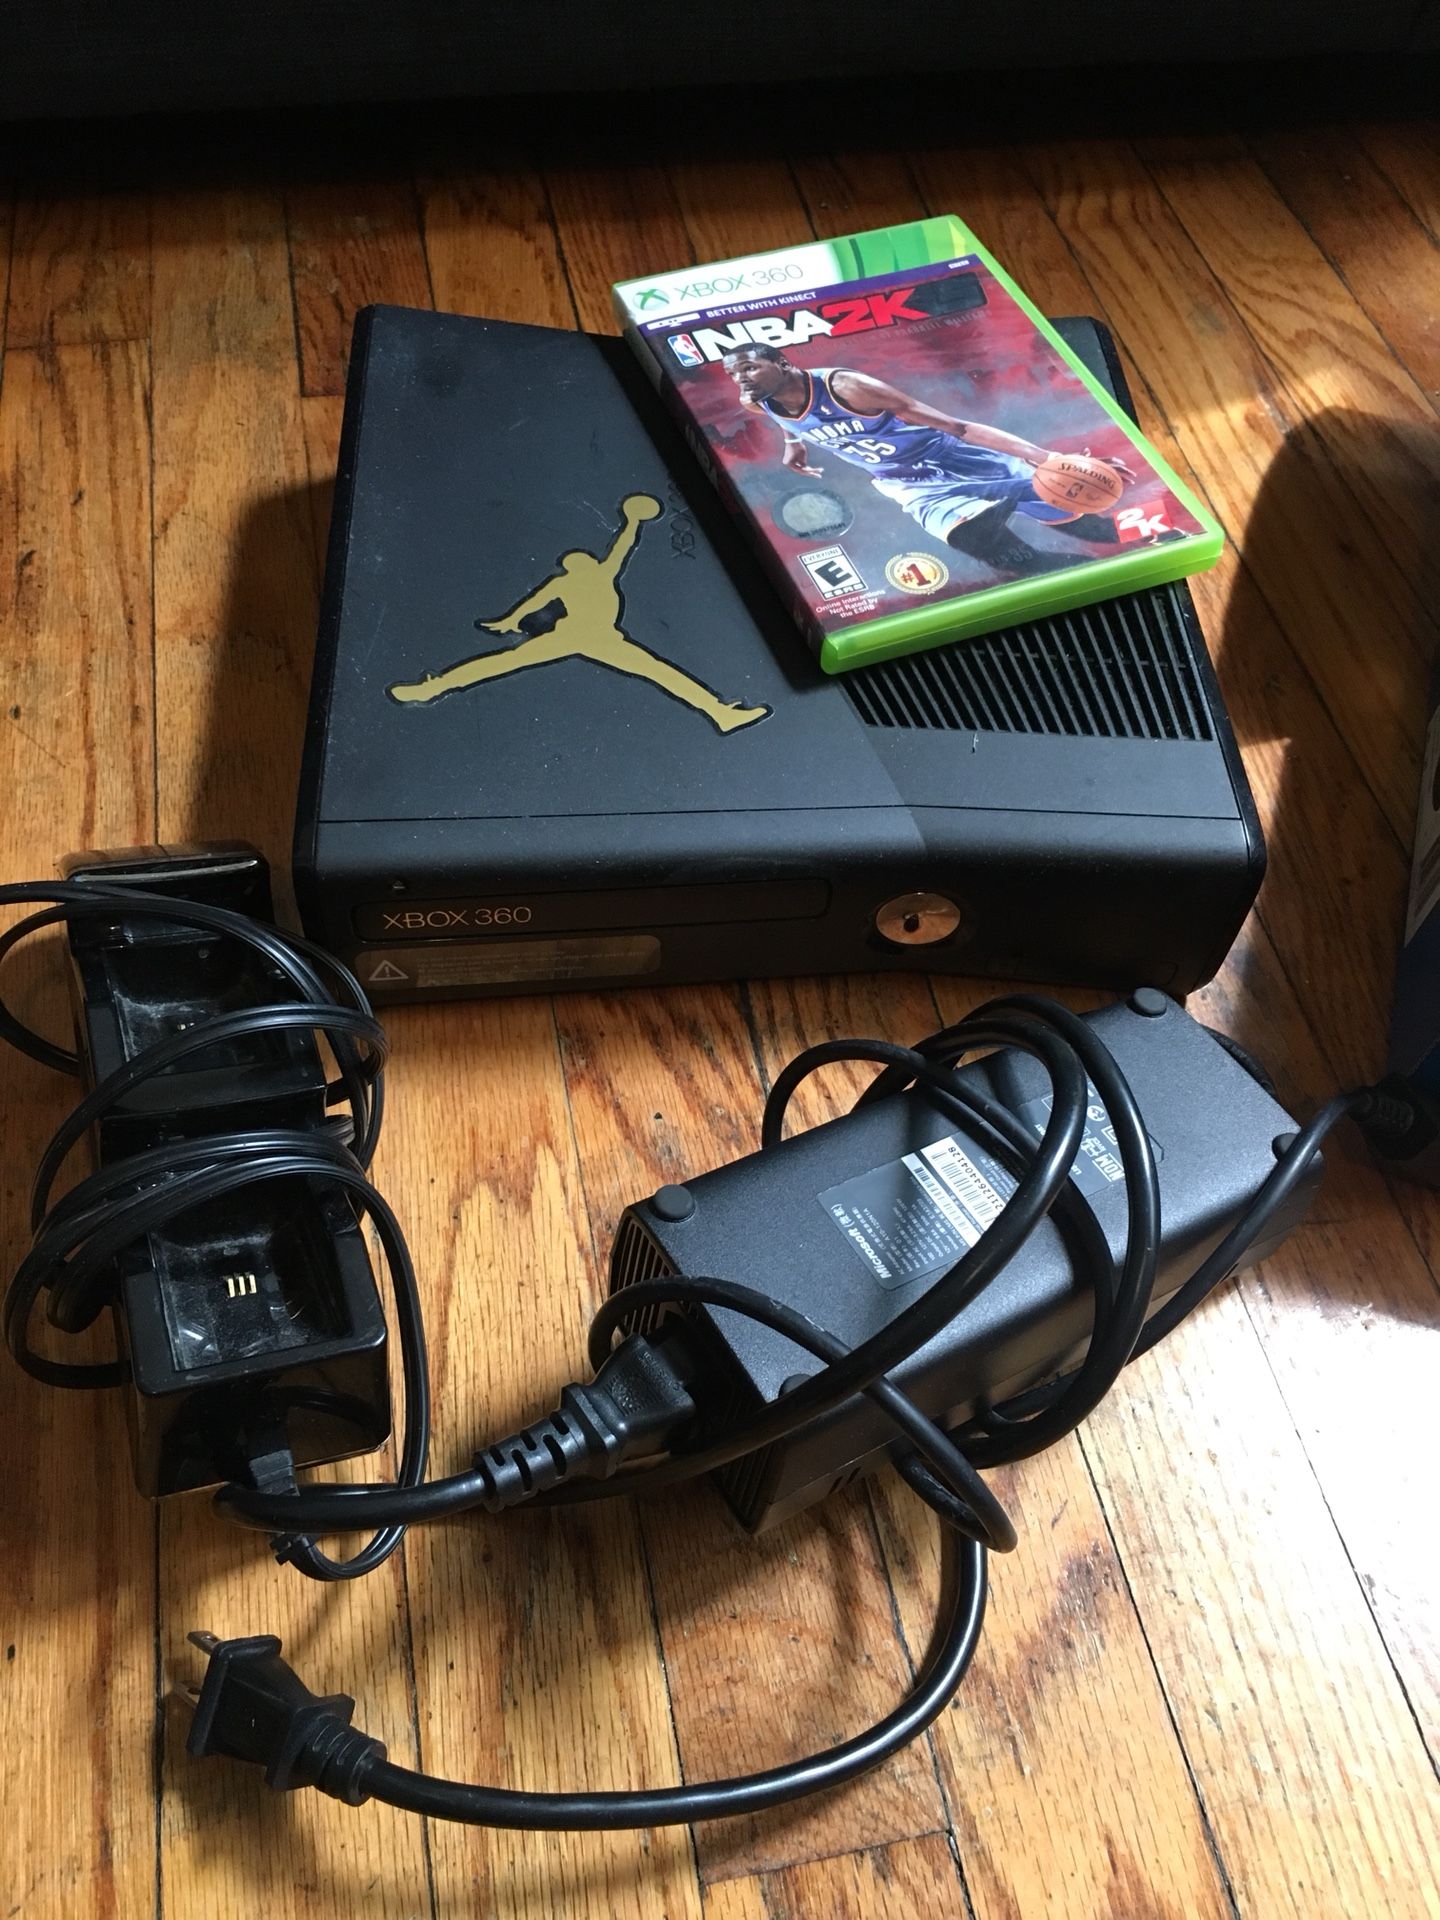 Xbox 360, controller charging station, NBA 2k15 game